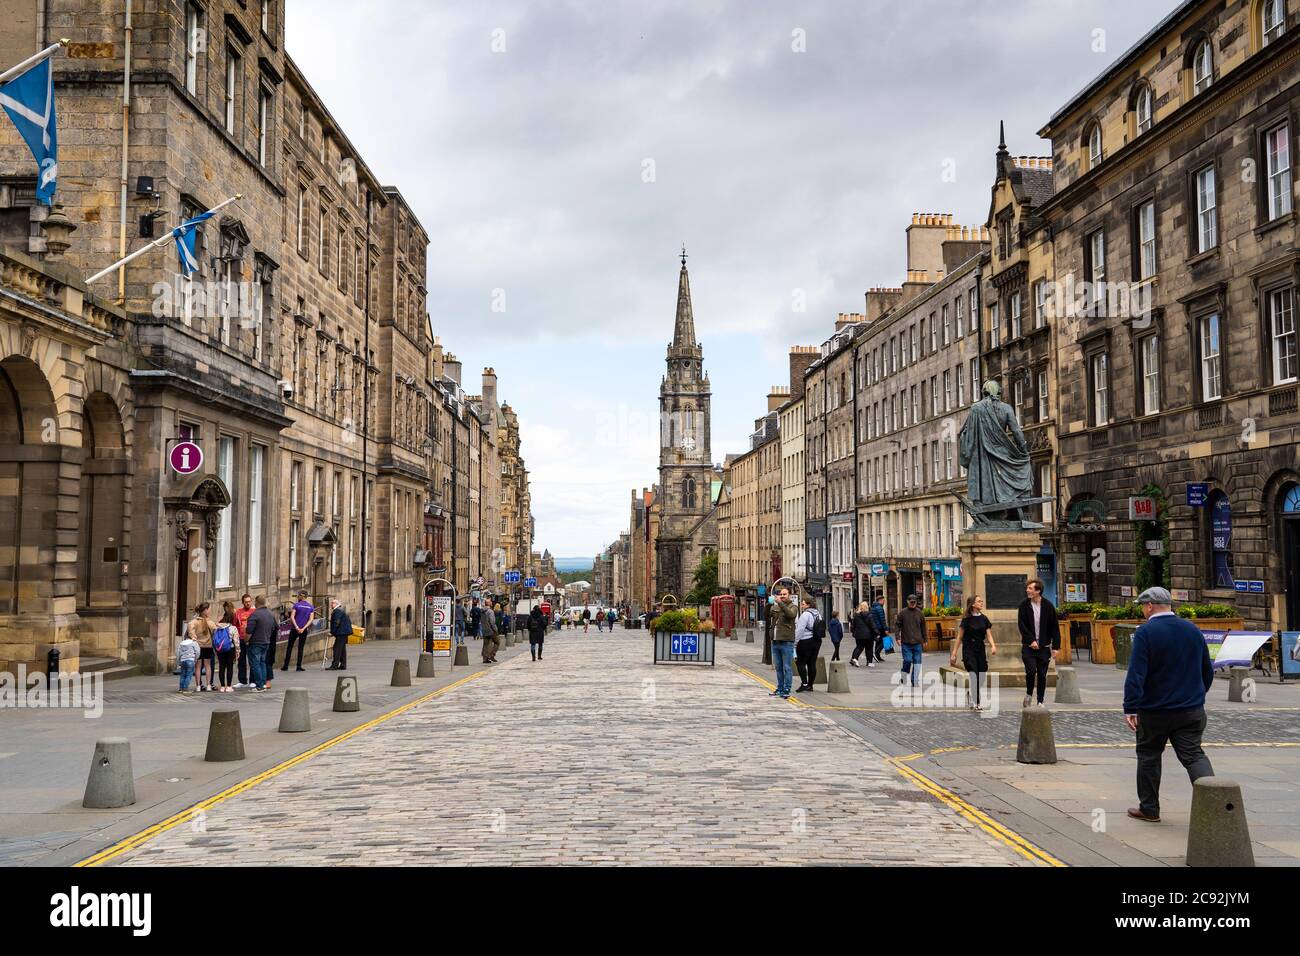 Edinburgh, Scotland, UK. 28 July, 2020. Business and tourism slowly returning to the shops and streets of Edinburgh city centre.View of the Royal Mile in the Old Town which is still much quieter than normal at this time of year.  Iain Masterton/Alamy Live News Stock Photo